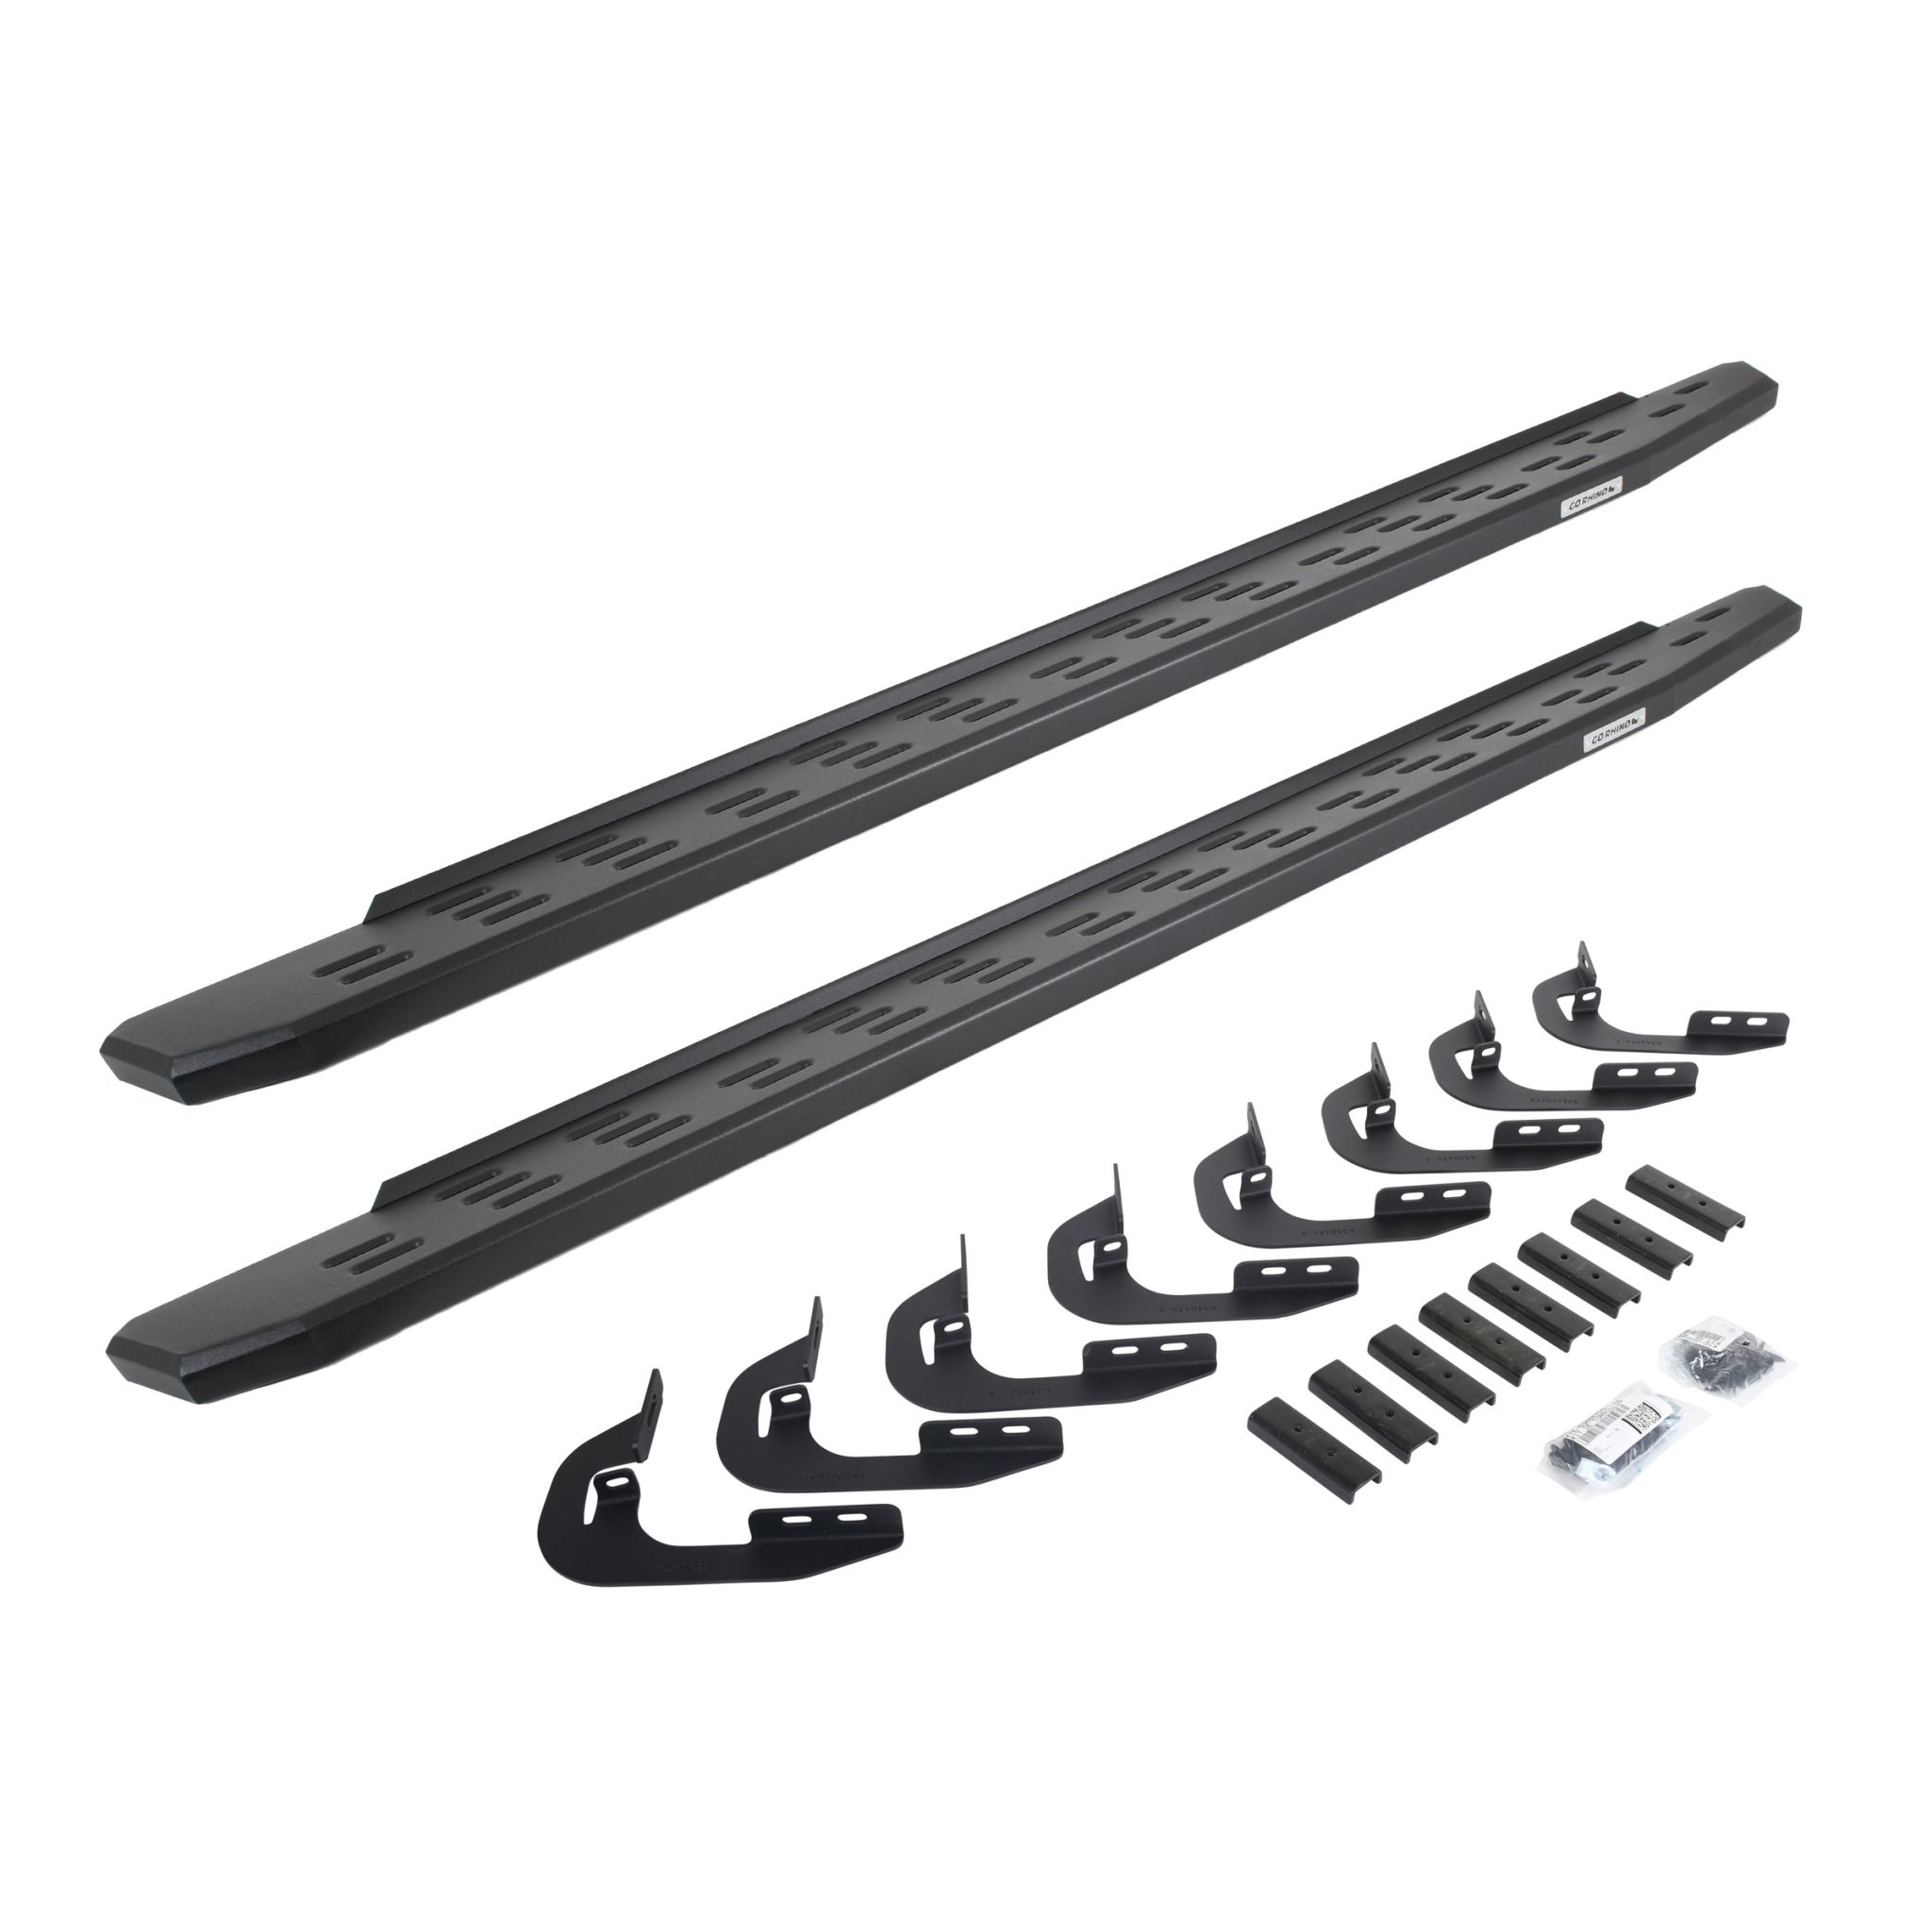 Go Rhino 69605880PC - RB30 Running Boards with Mounting Bracket Kit - Textured Black